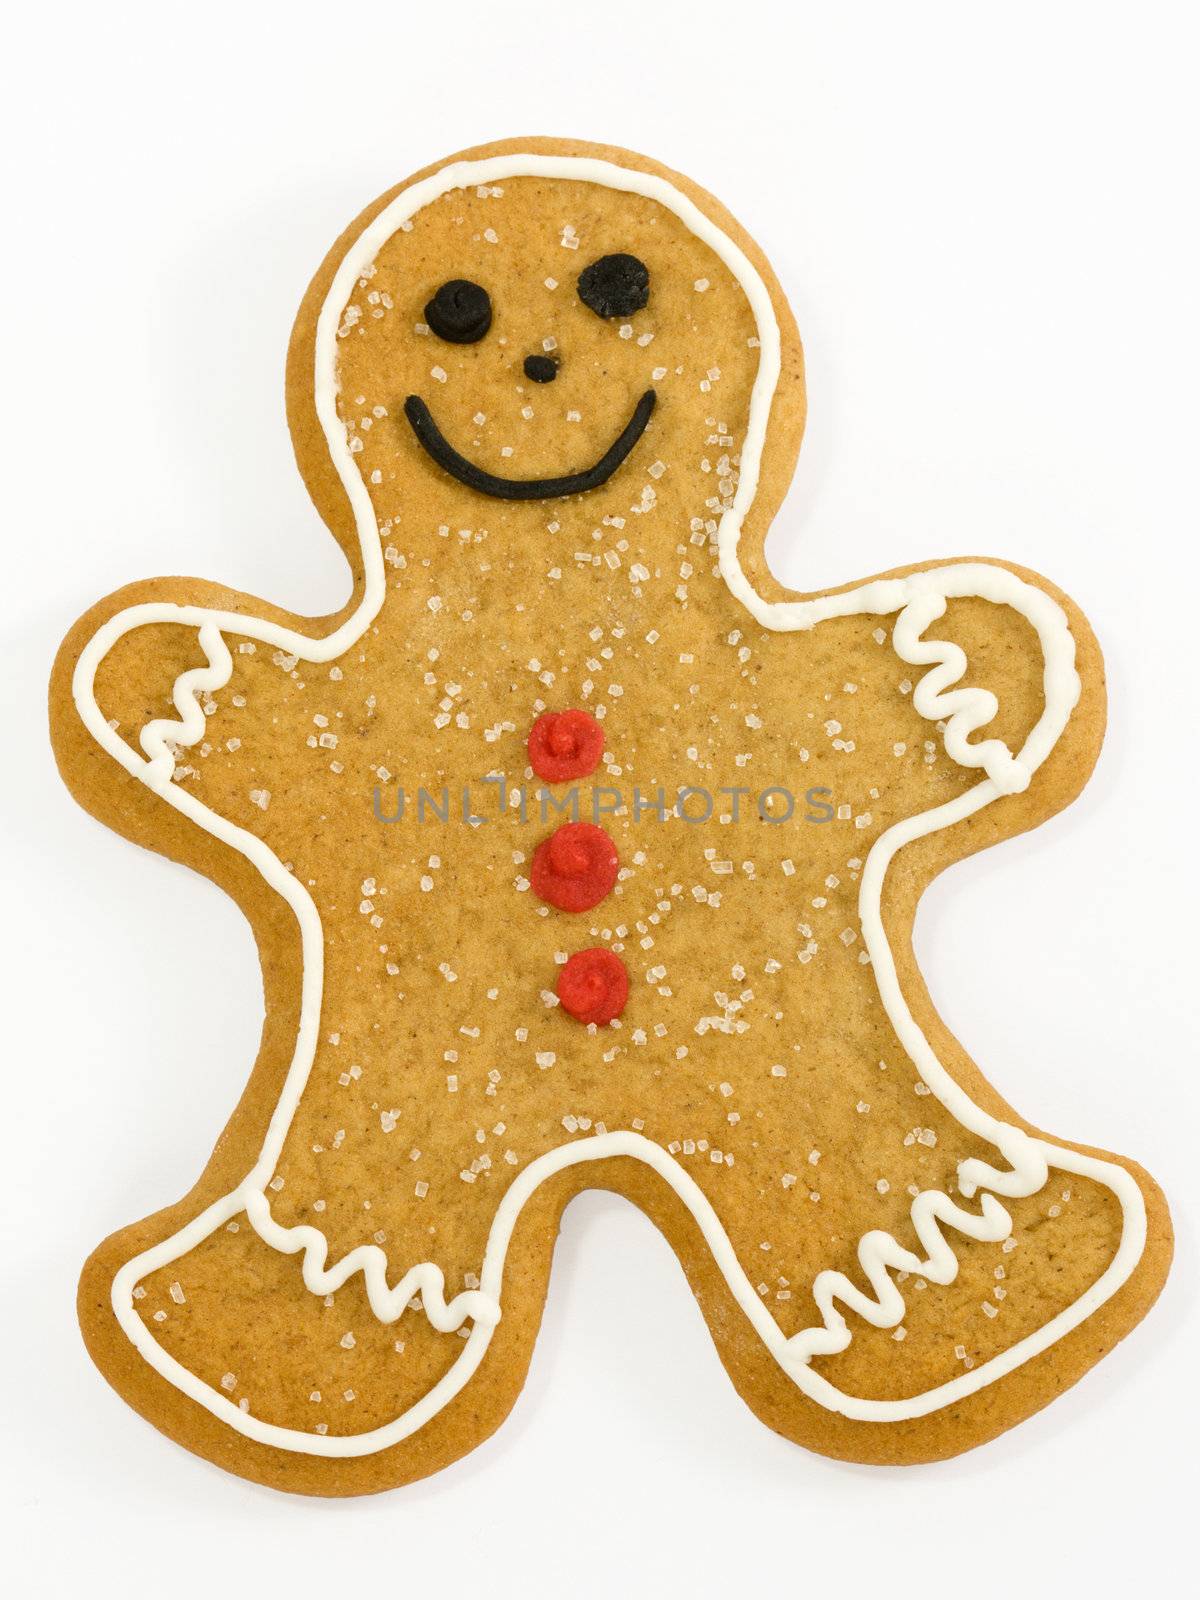 Smiling gingerbread man with red buttons